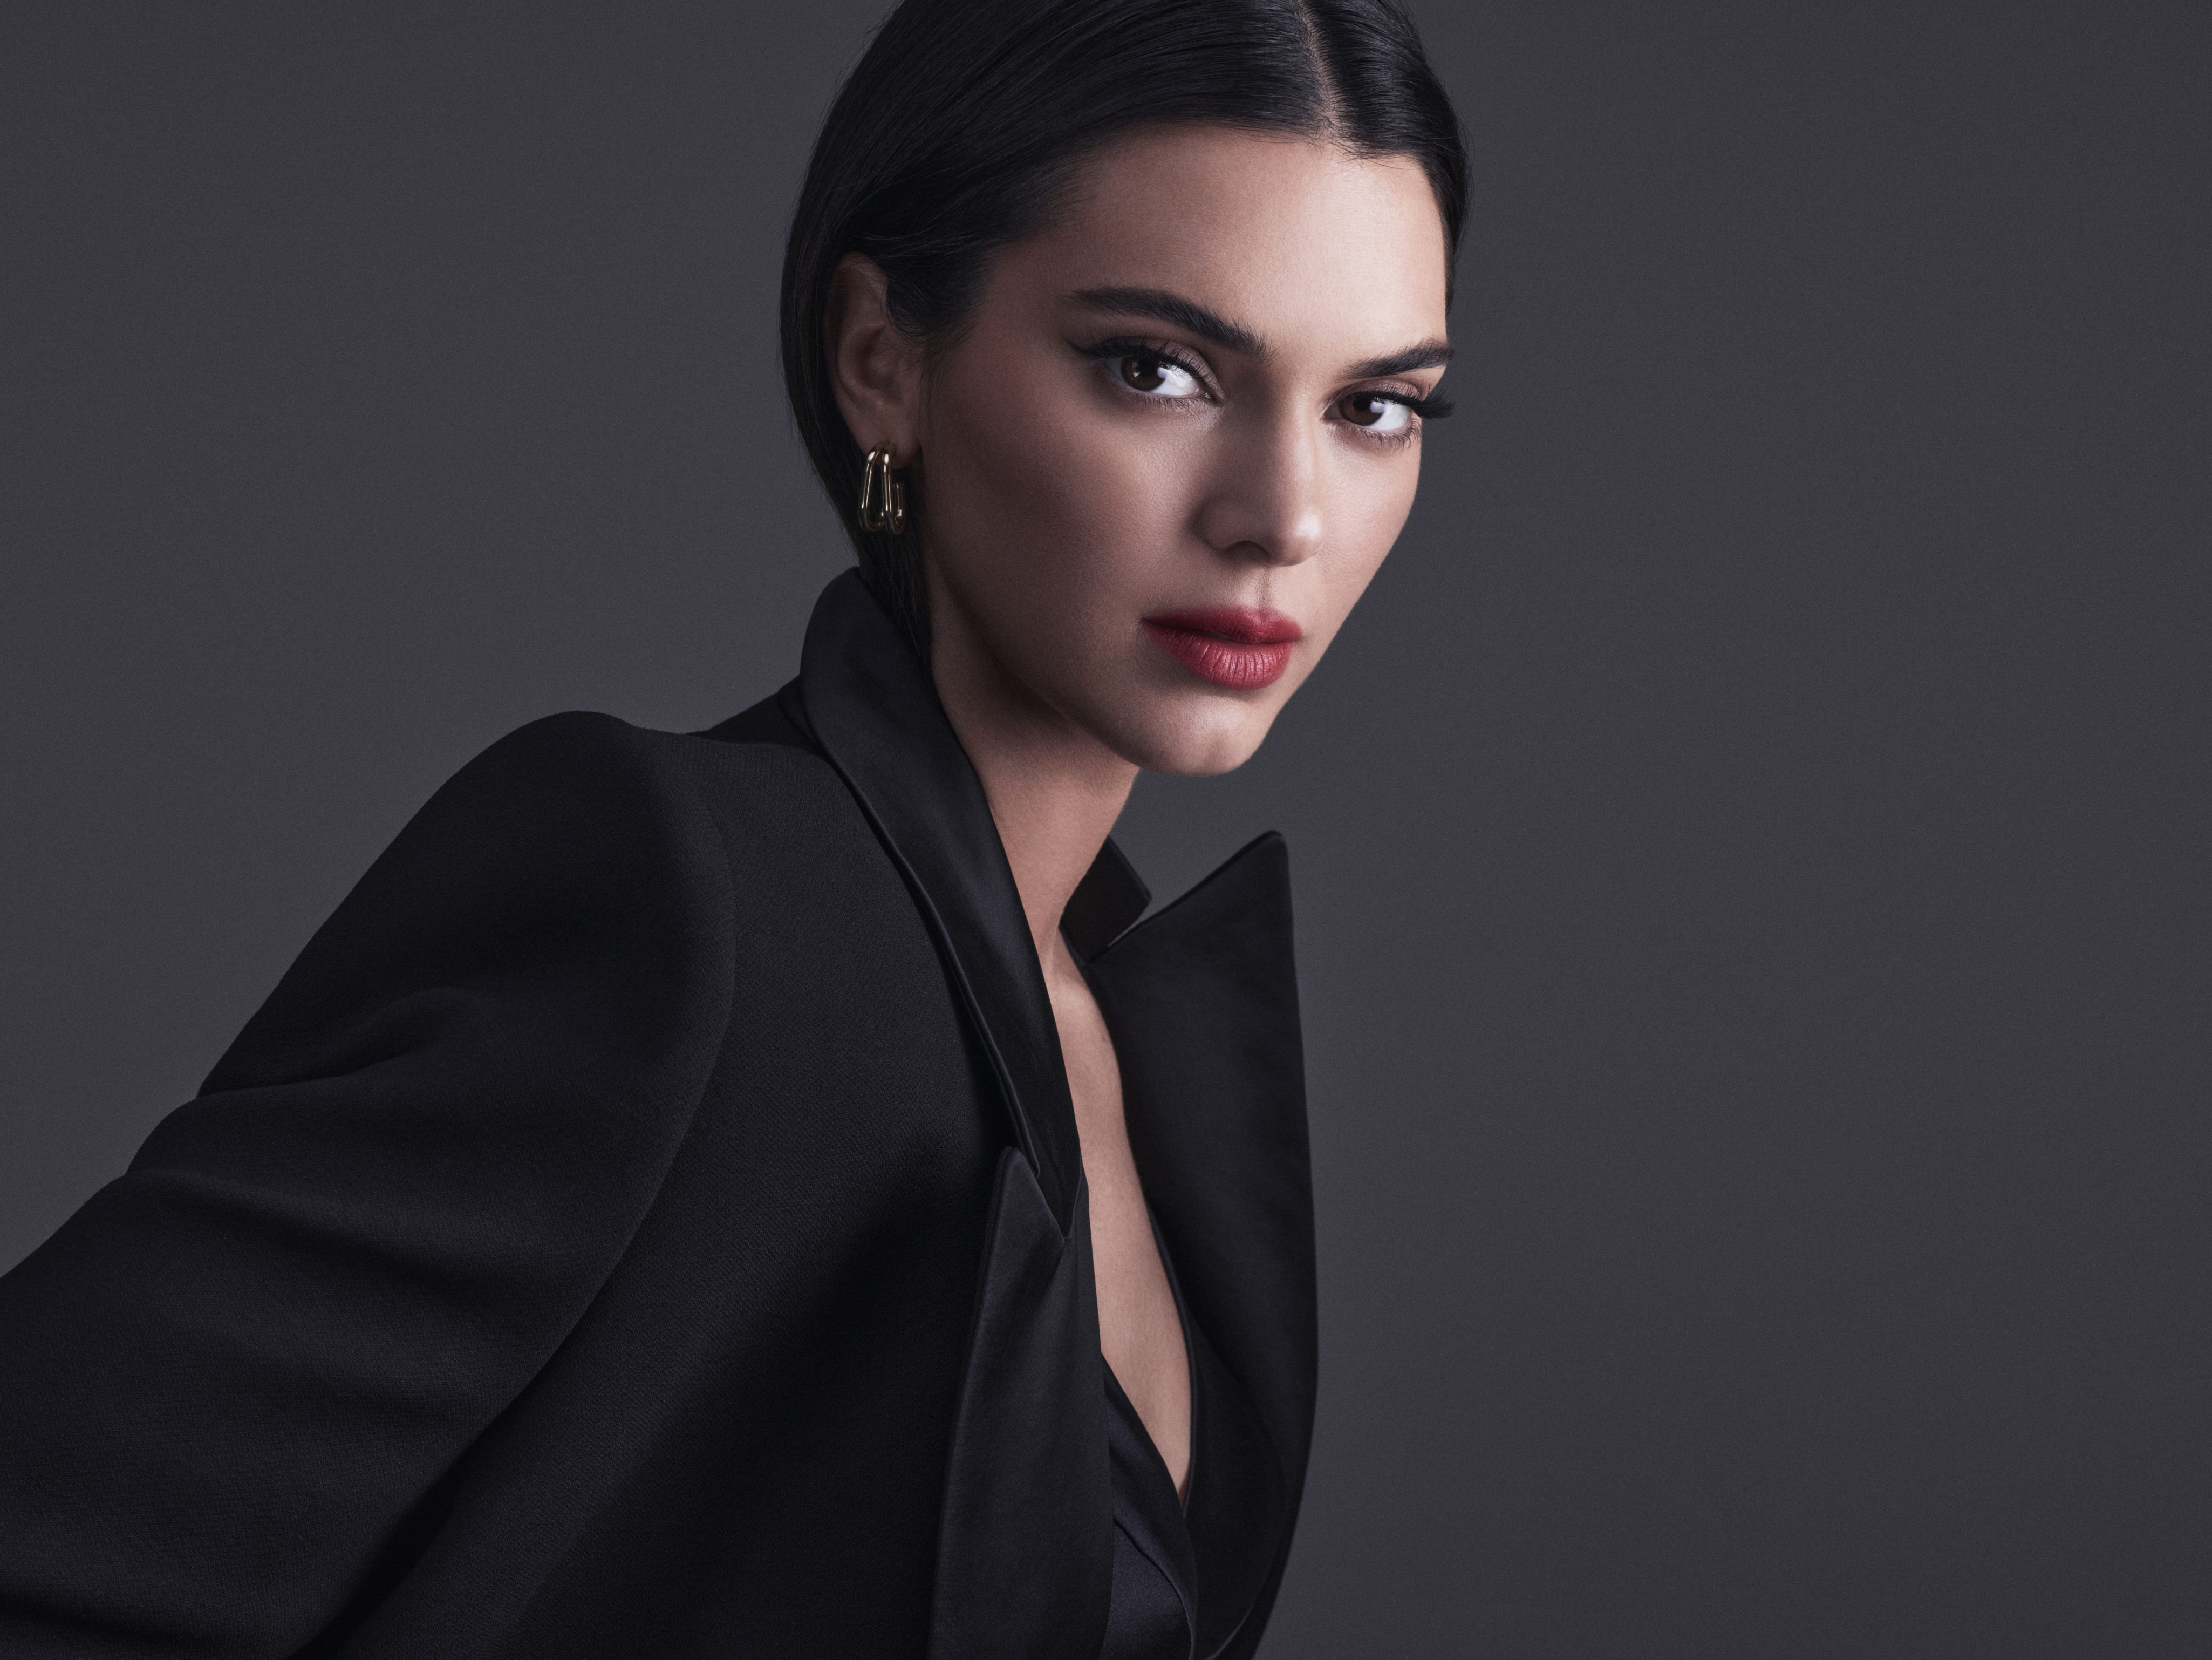 Kendall Jenner is the New Face of L’Oréal Paris